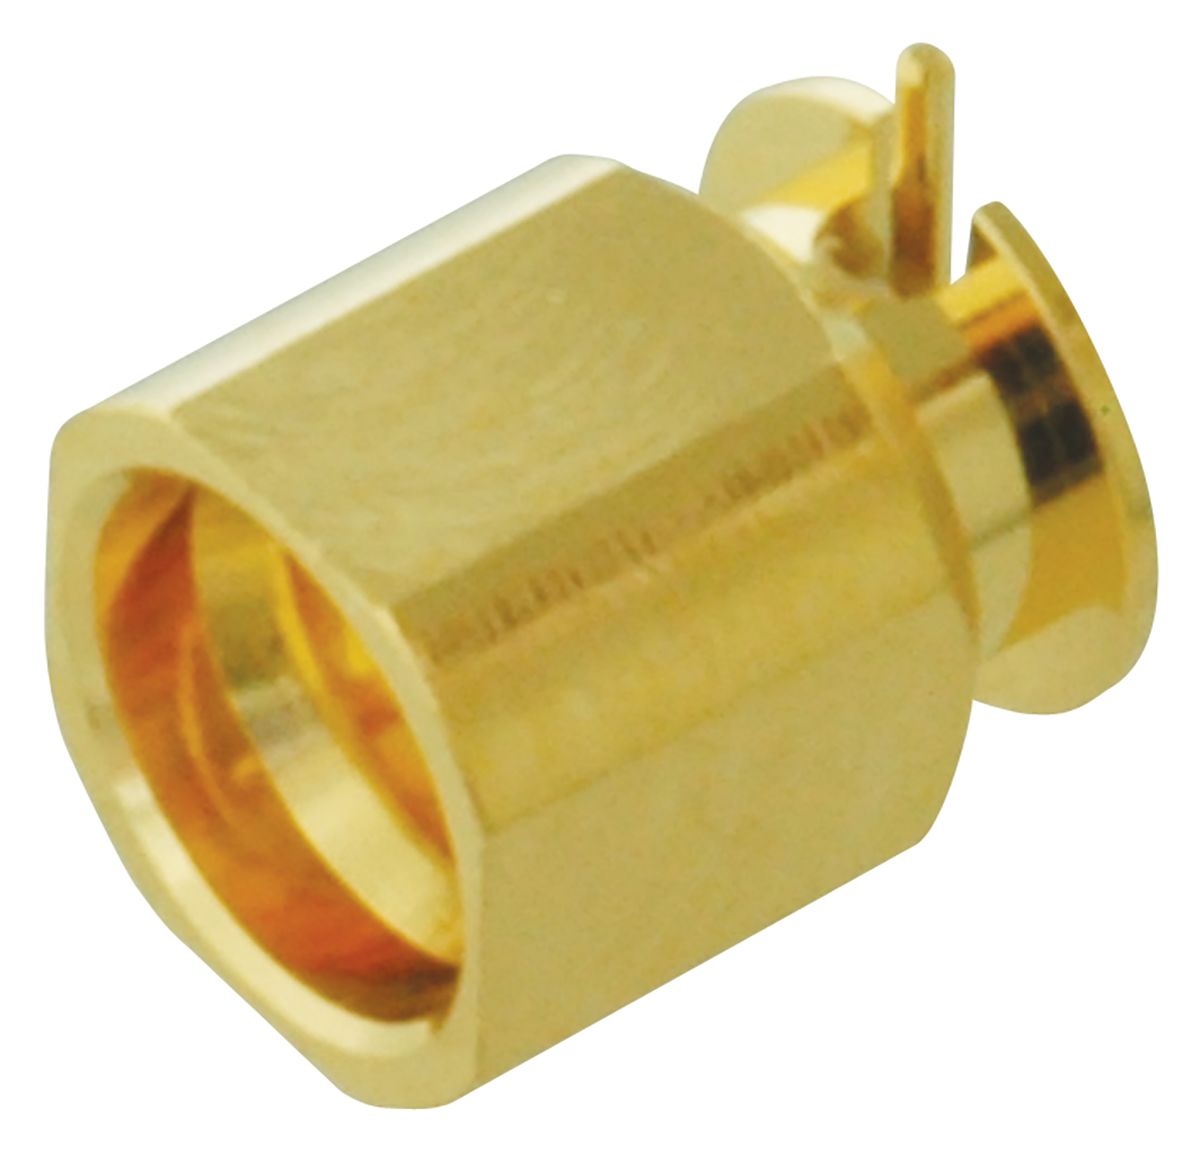 Yuetsu 50Ω Straight Surface Mount, SMP Connector Bulkhead Fitting, Plug